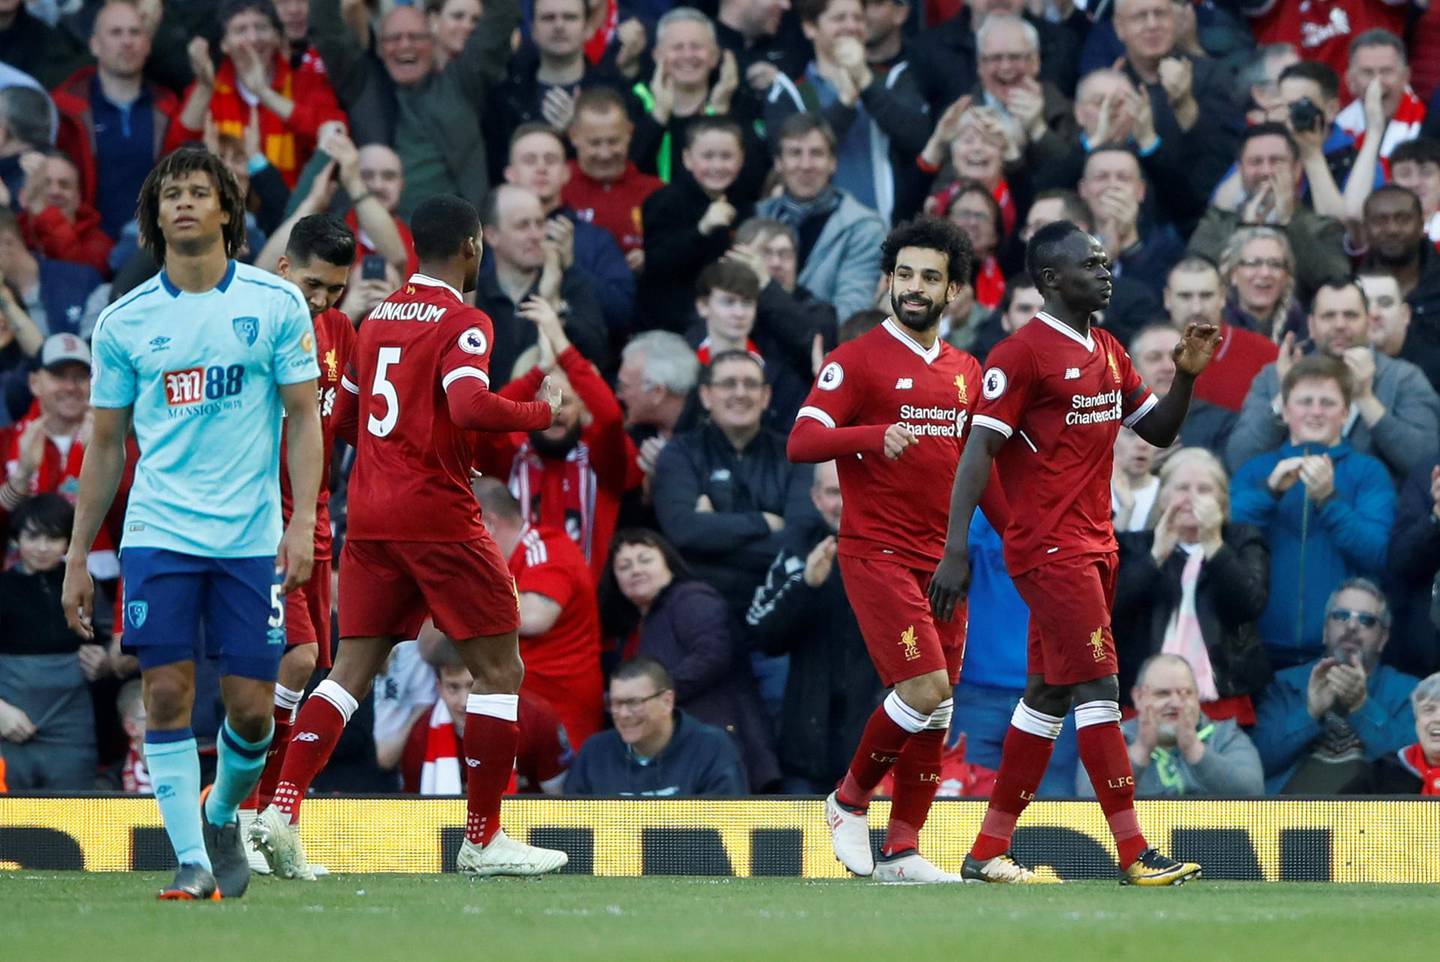 Soccer Football - Premier League - Liverpool vs AFC Bournemouth - Anfield, Liverpool, Britain - April 14, 2018   Liverpool's Mohamed Salah celebrates scoring their second goal with team mates      Action Images via Reuters/Carl Recine    EDITORIAL USE ONLY. No use with unauthorized audio, video, data, fixture lists, club/league logos or "live" services. Online in-match use limited to 75 images, no video emulation. No use in betting, games or single club/league/player publications.  Please contact your account representative for further details.